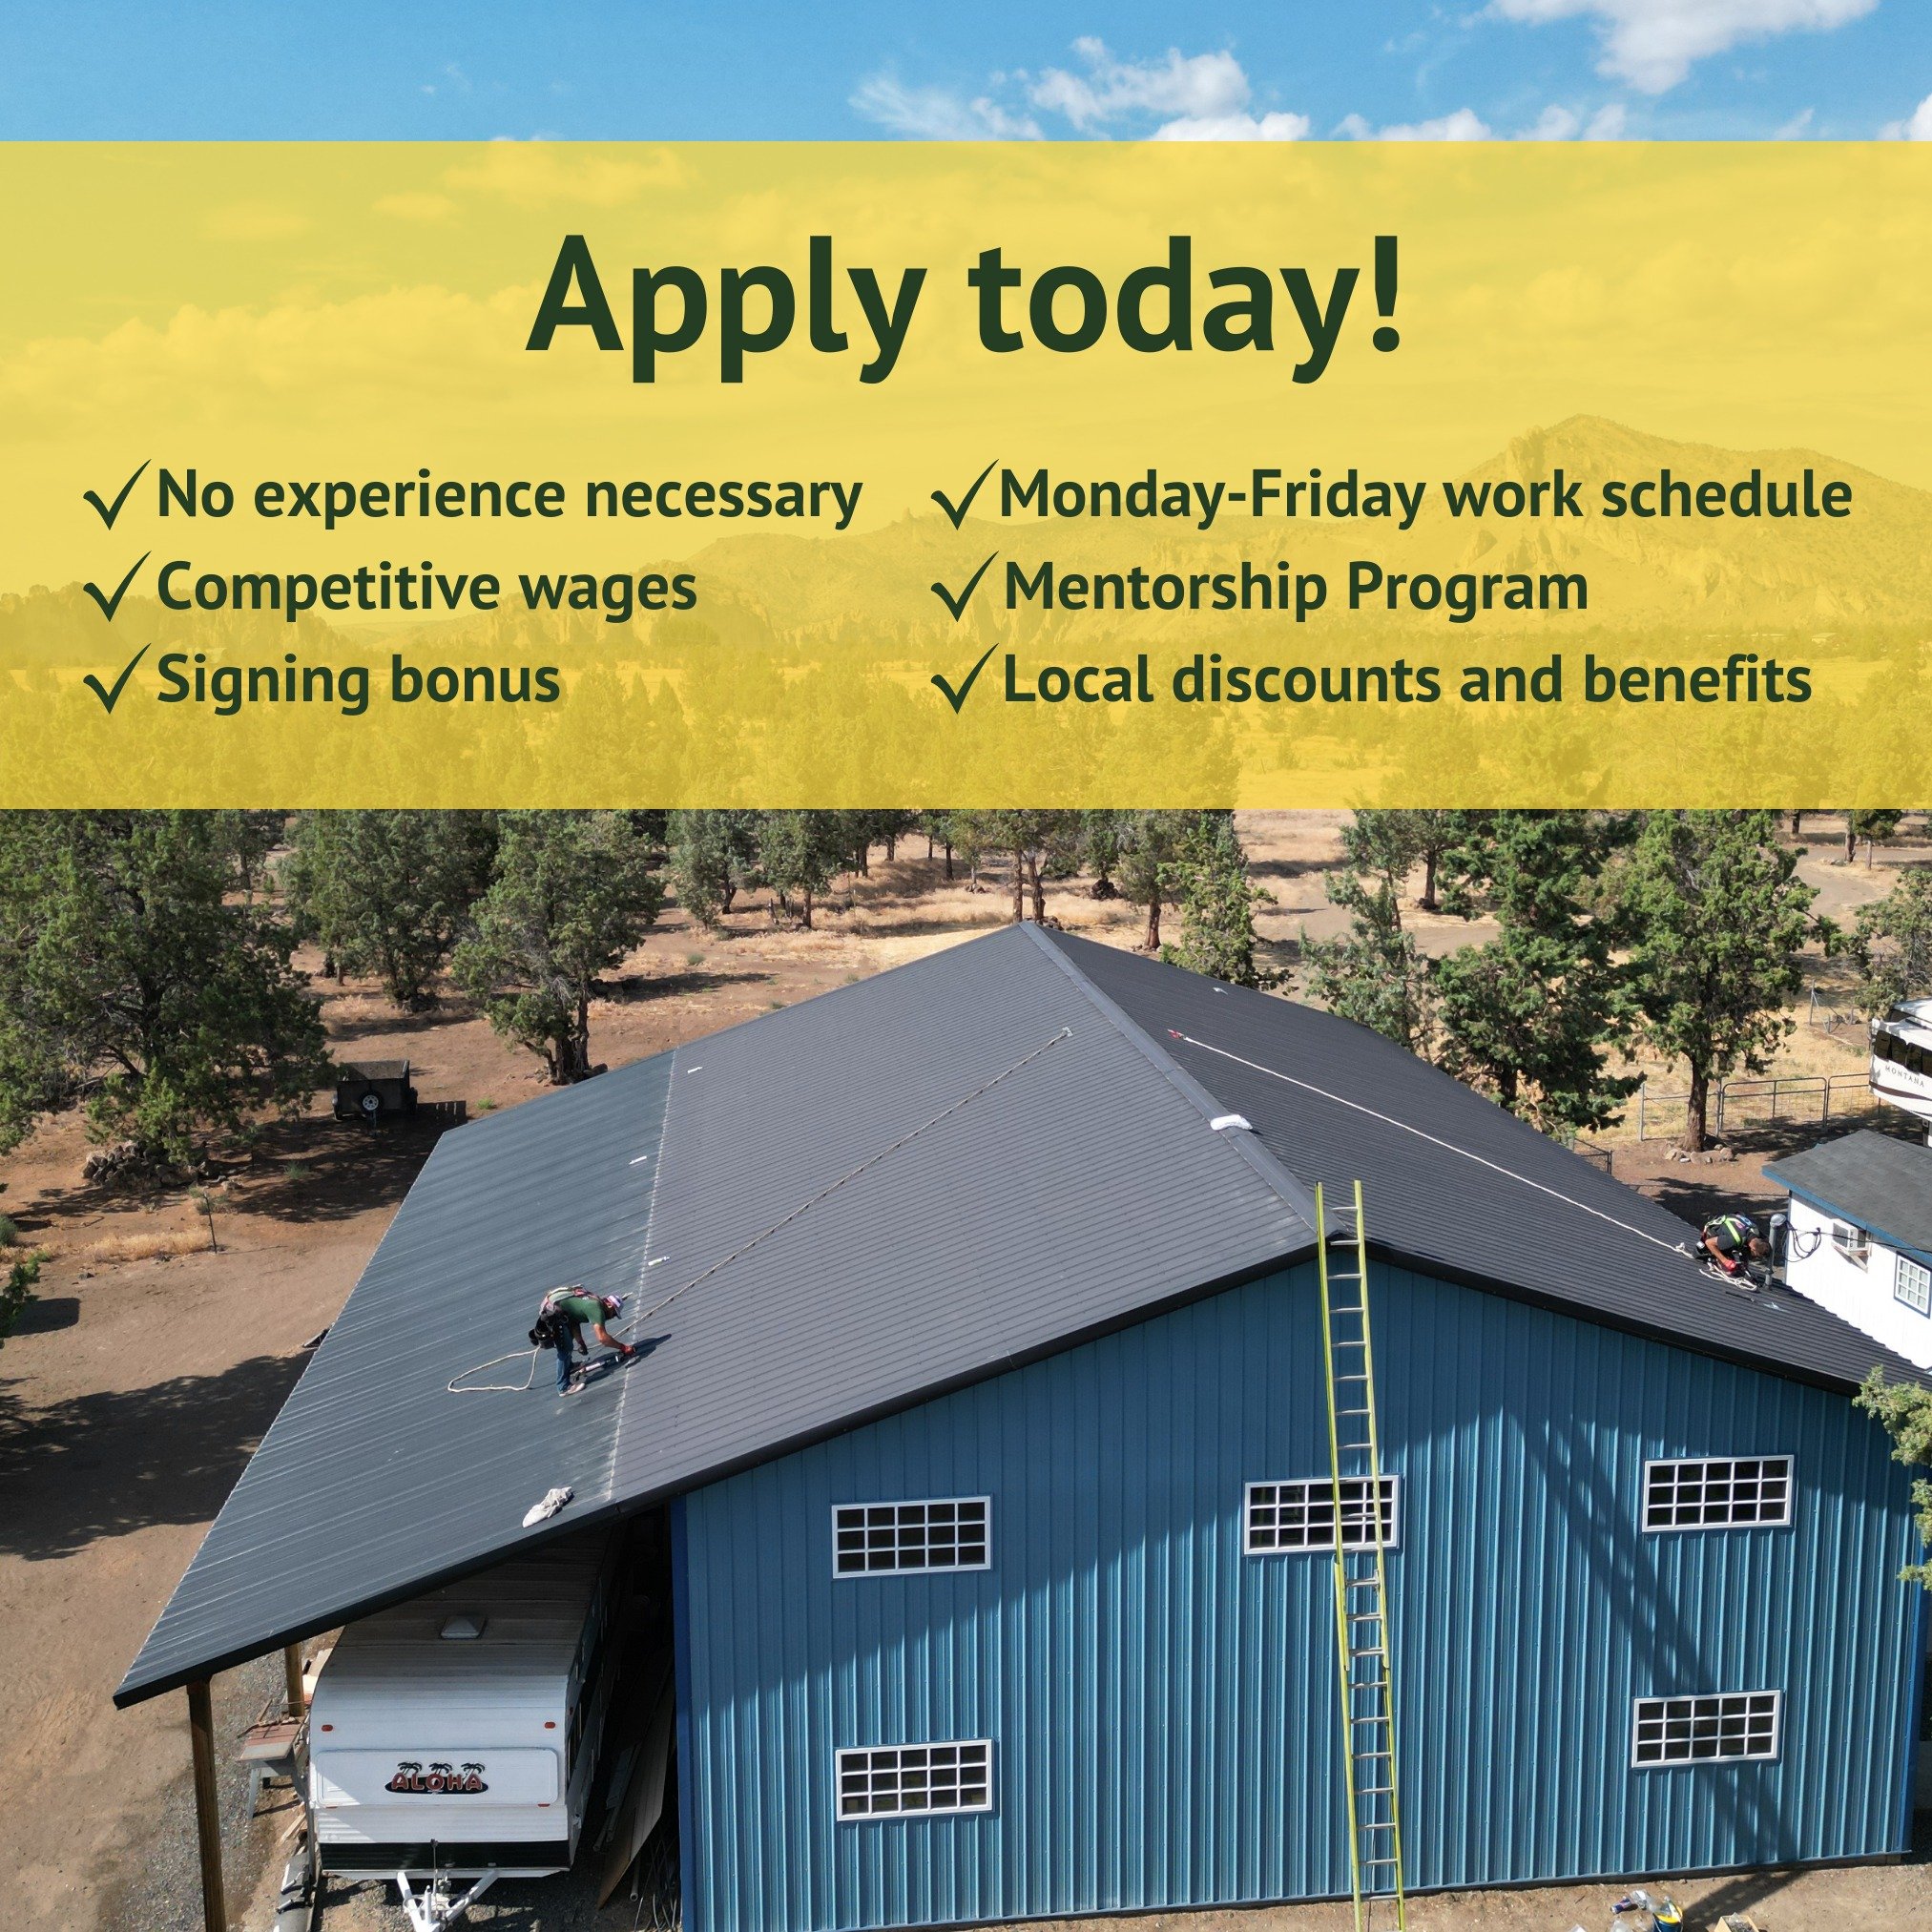 We're looking for individuals with a strong work ethic who take pride in their work and a willingness to learn! If that's you, apply today!

https://www.greenleeroofing.com/join-our-team